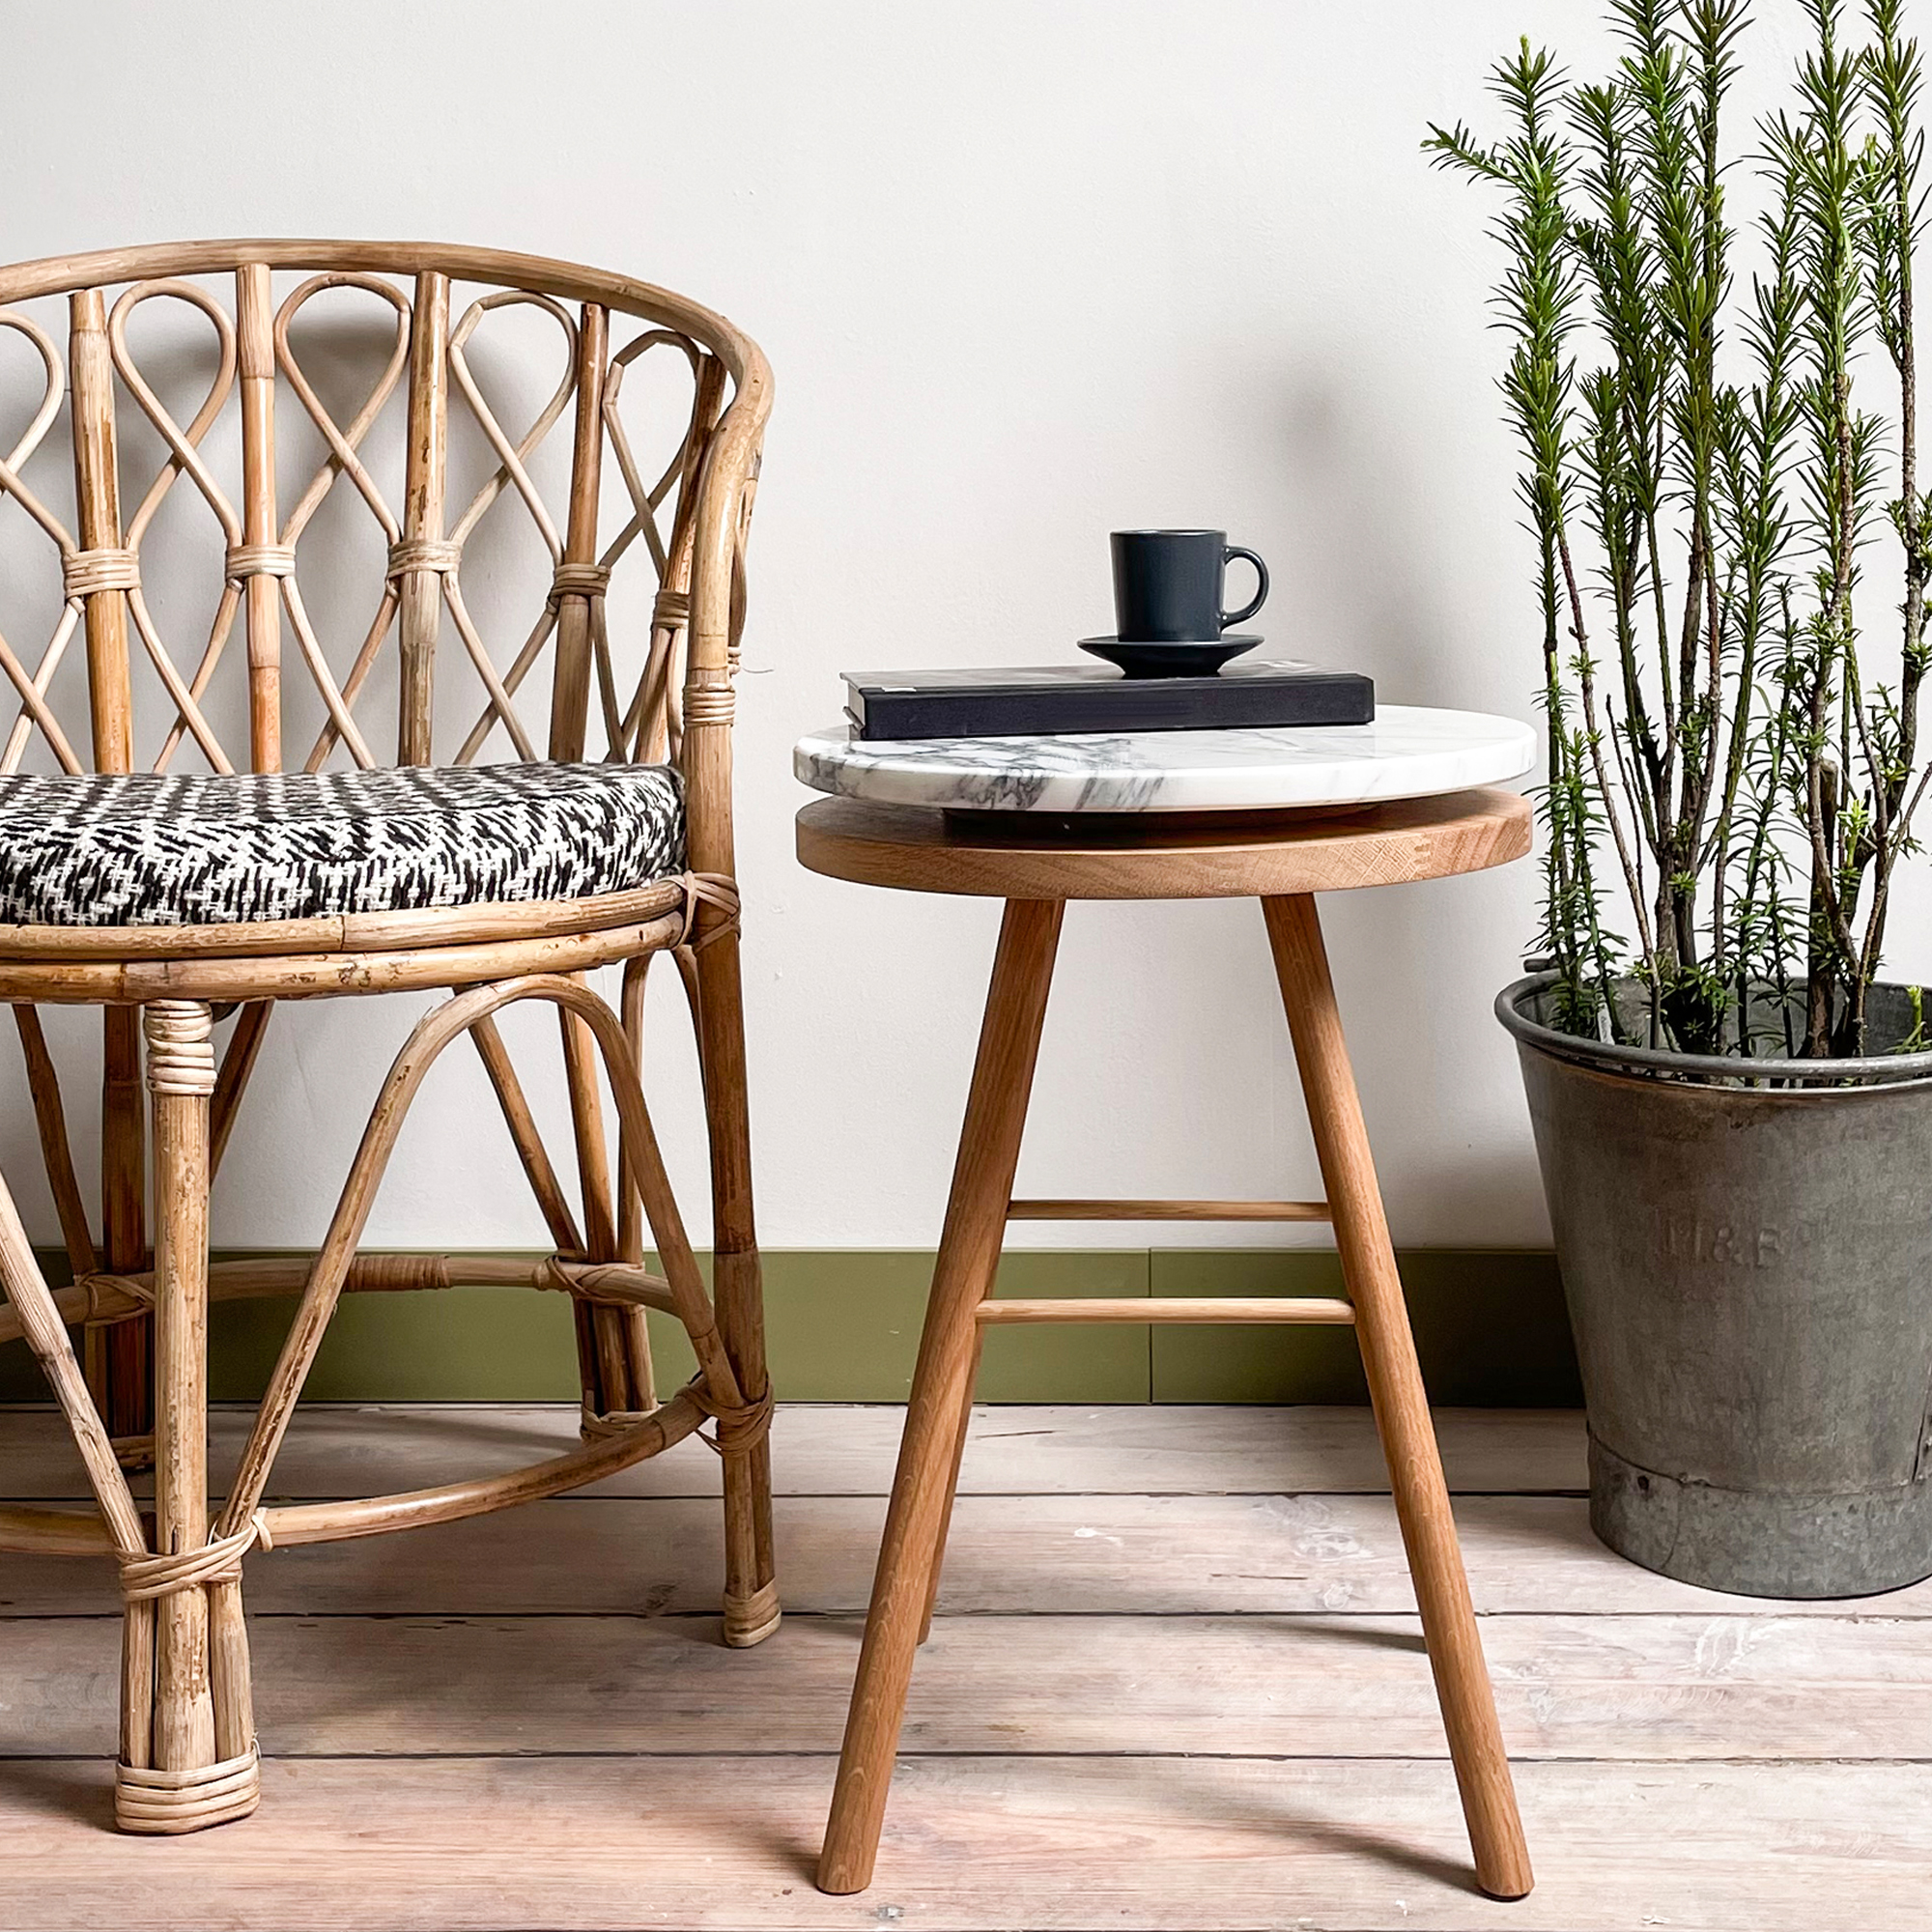 HEME — Portuguese brand of sustainable furniture that combines tradition with modernity